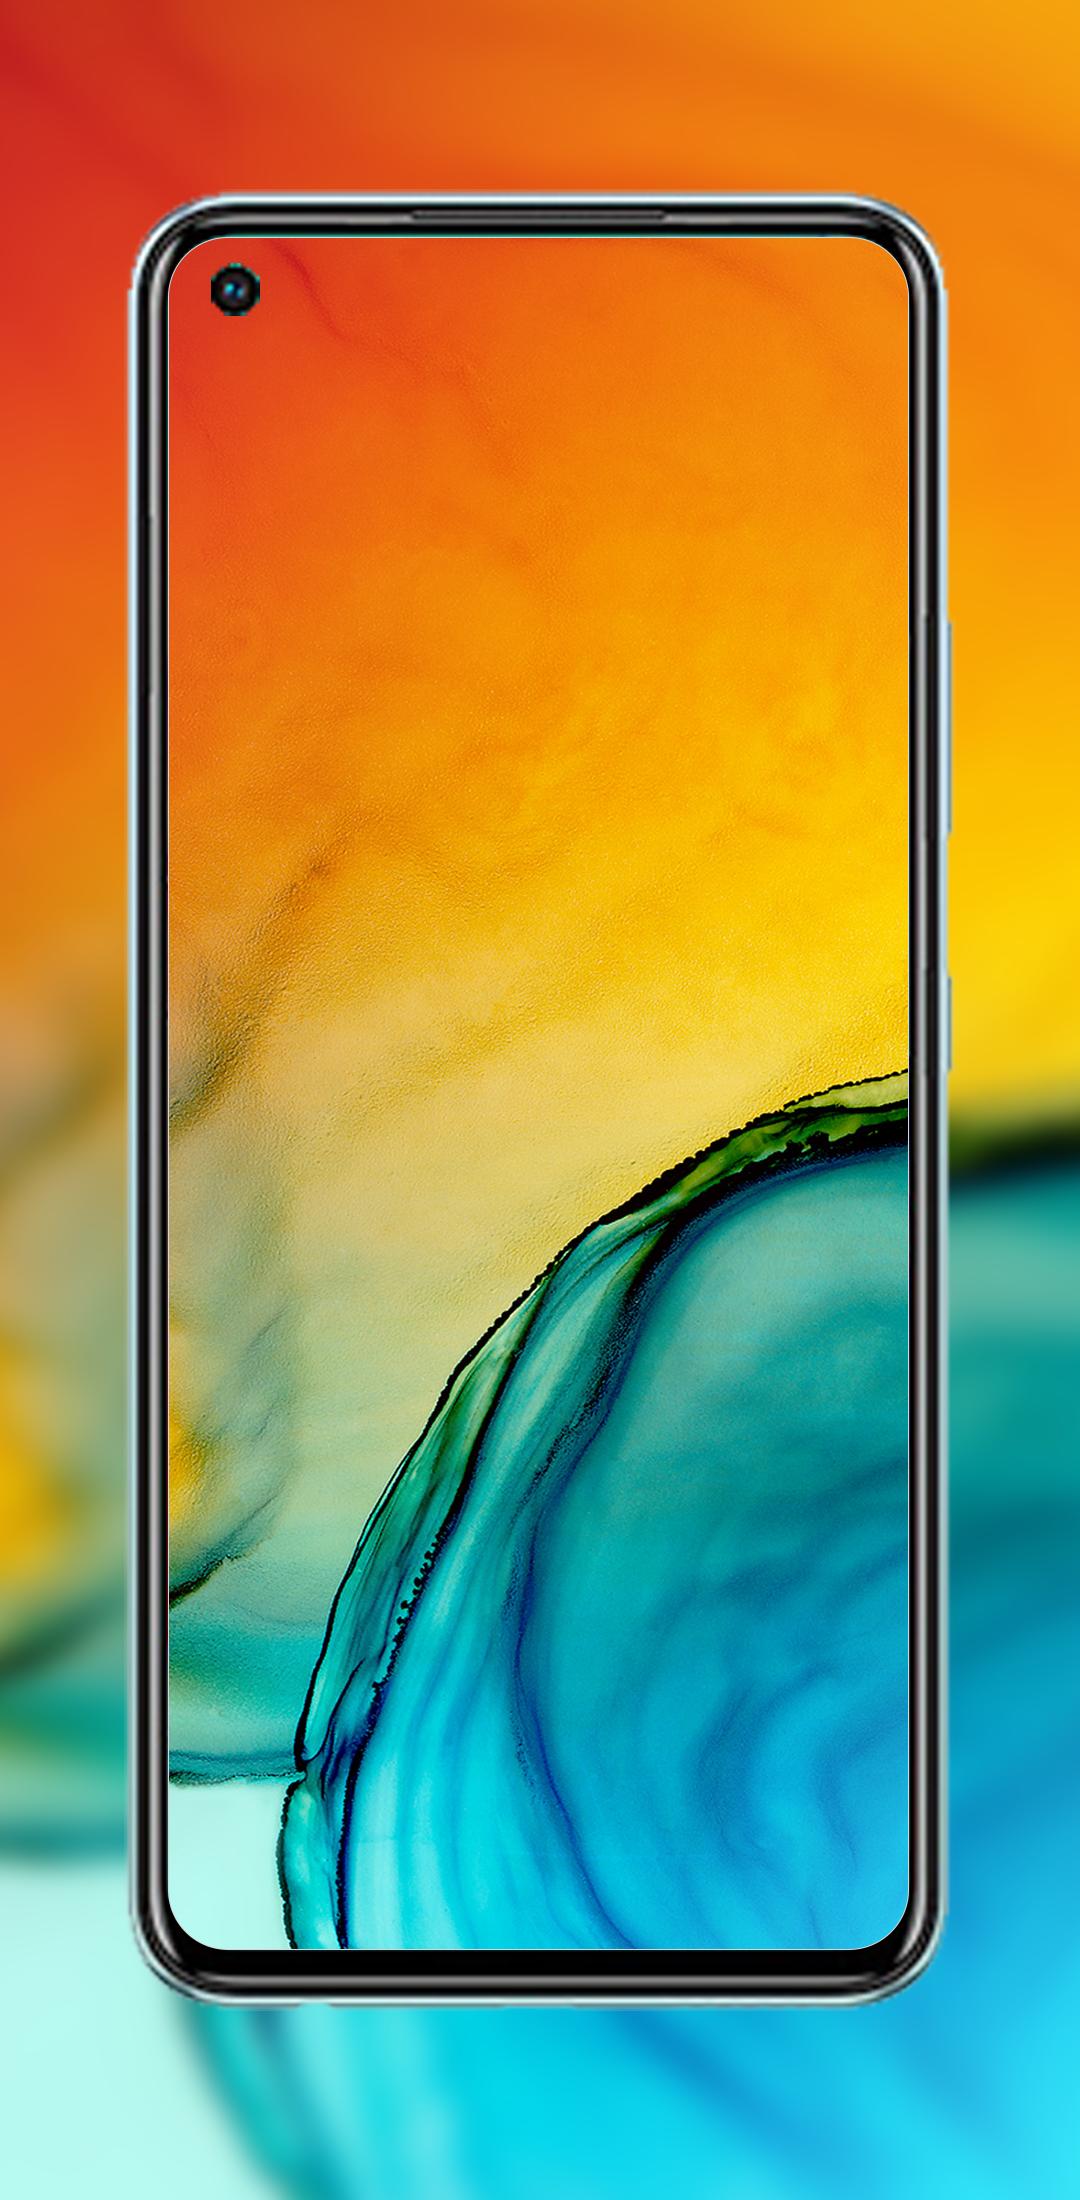 Wallpaper For Infinix Note Pro Android Apk